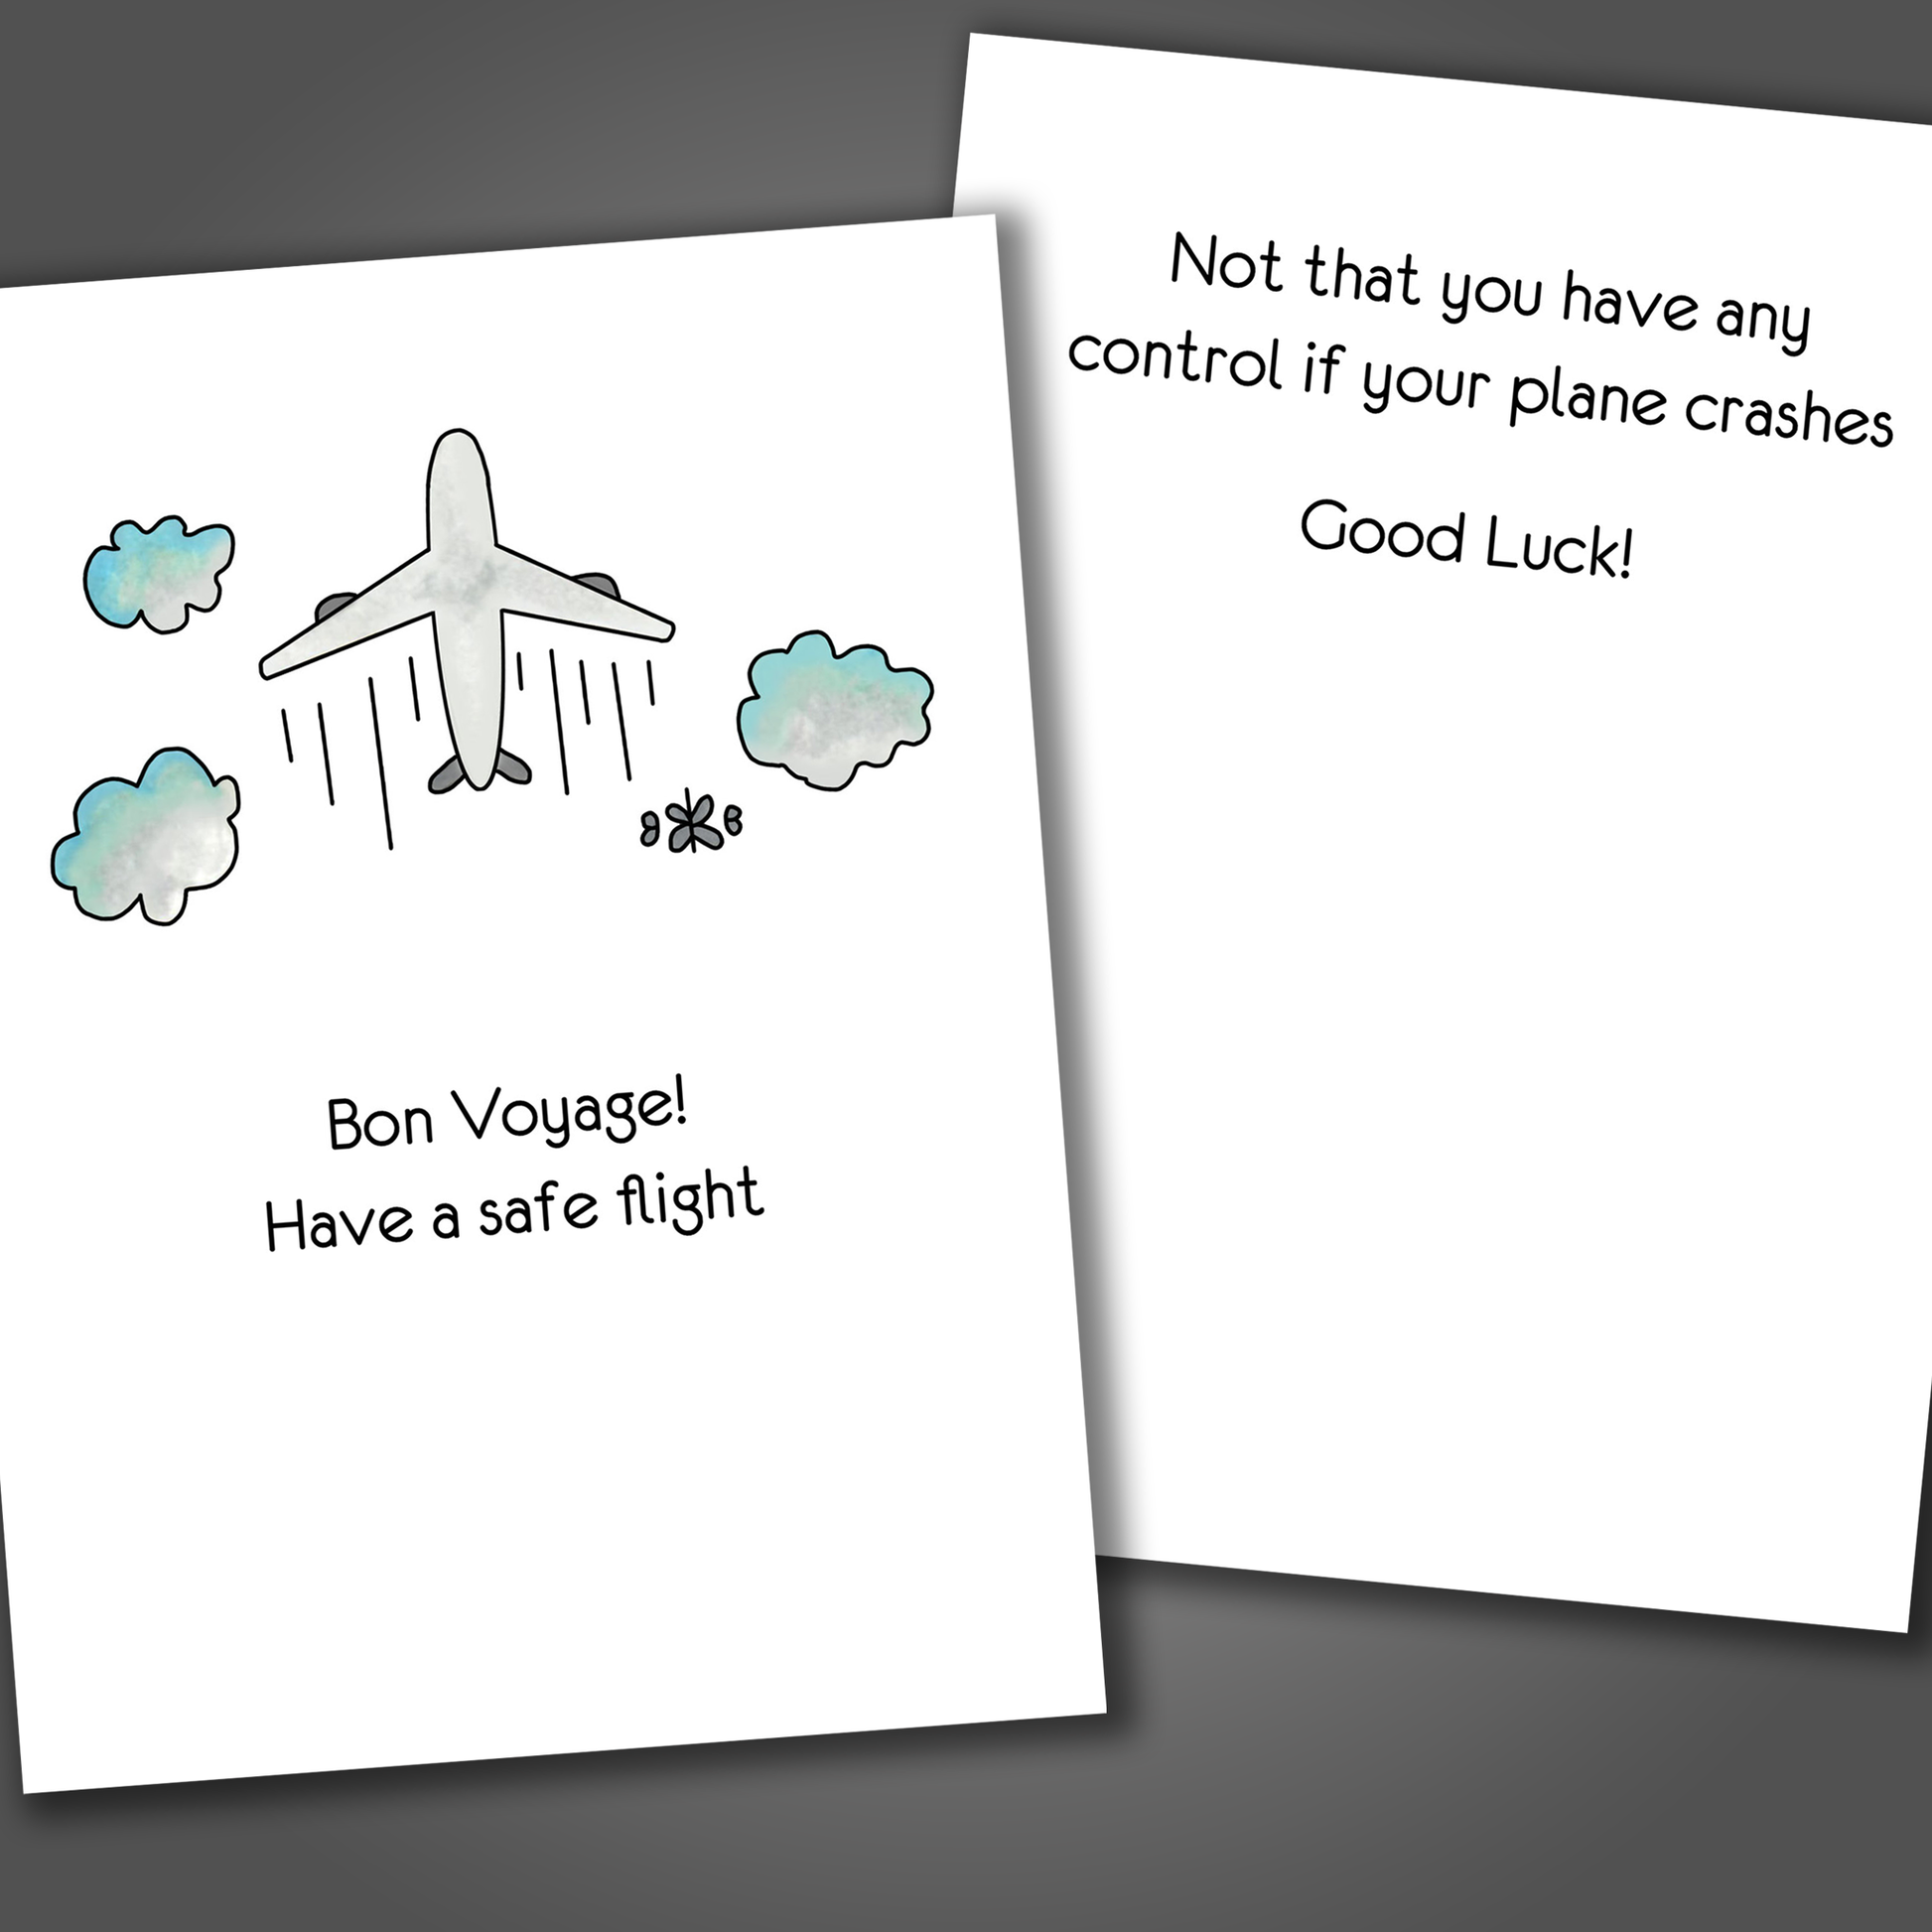 Funny vacation card with an airplane drawn on the front of the card. Inside the card is a funny joke that says not that you have any control if the plane crashes!